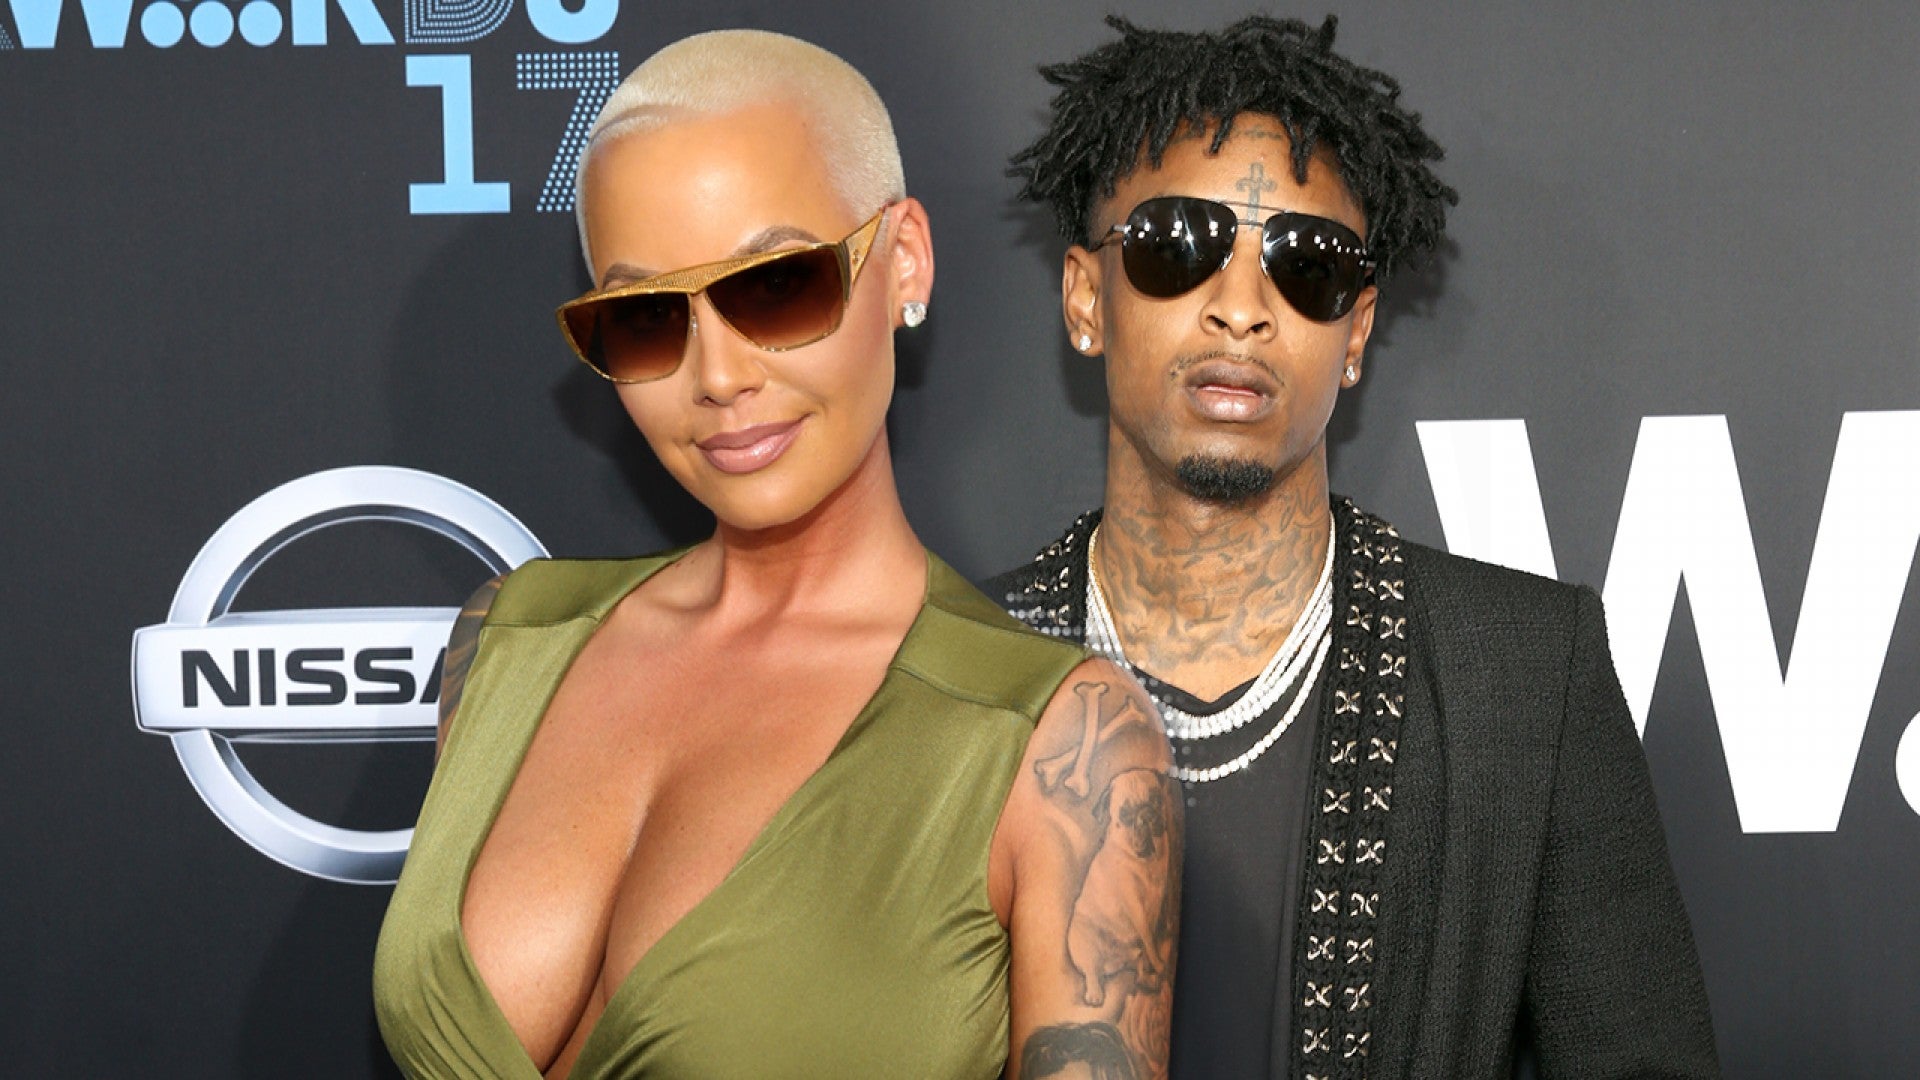 21 Savage and Amber Rose attending the 2017 MTV Video Music Awards